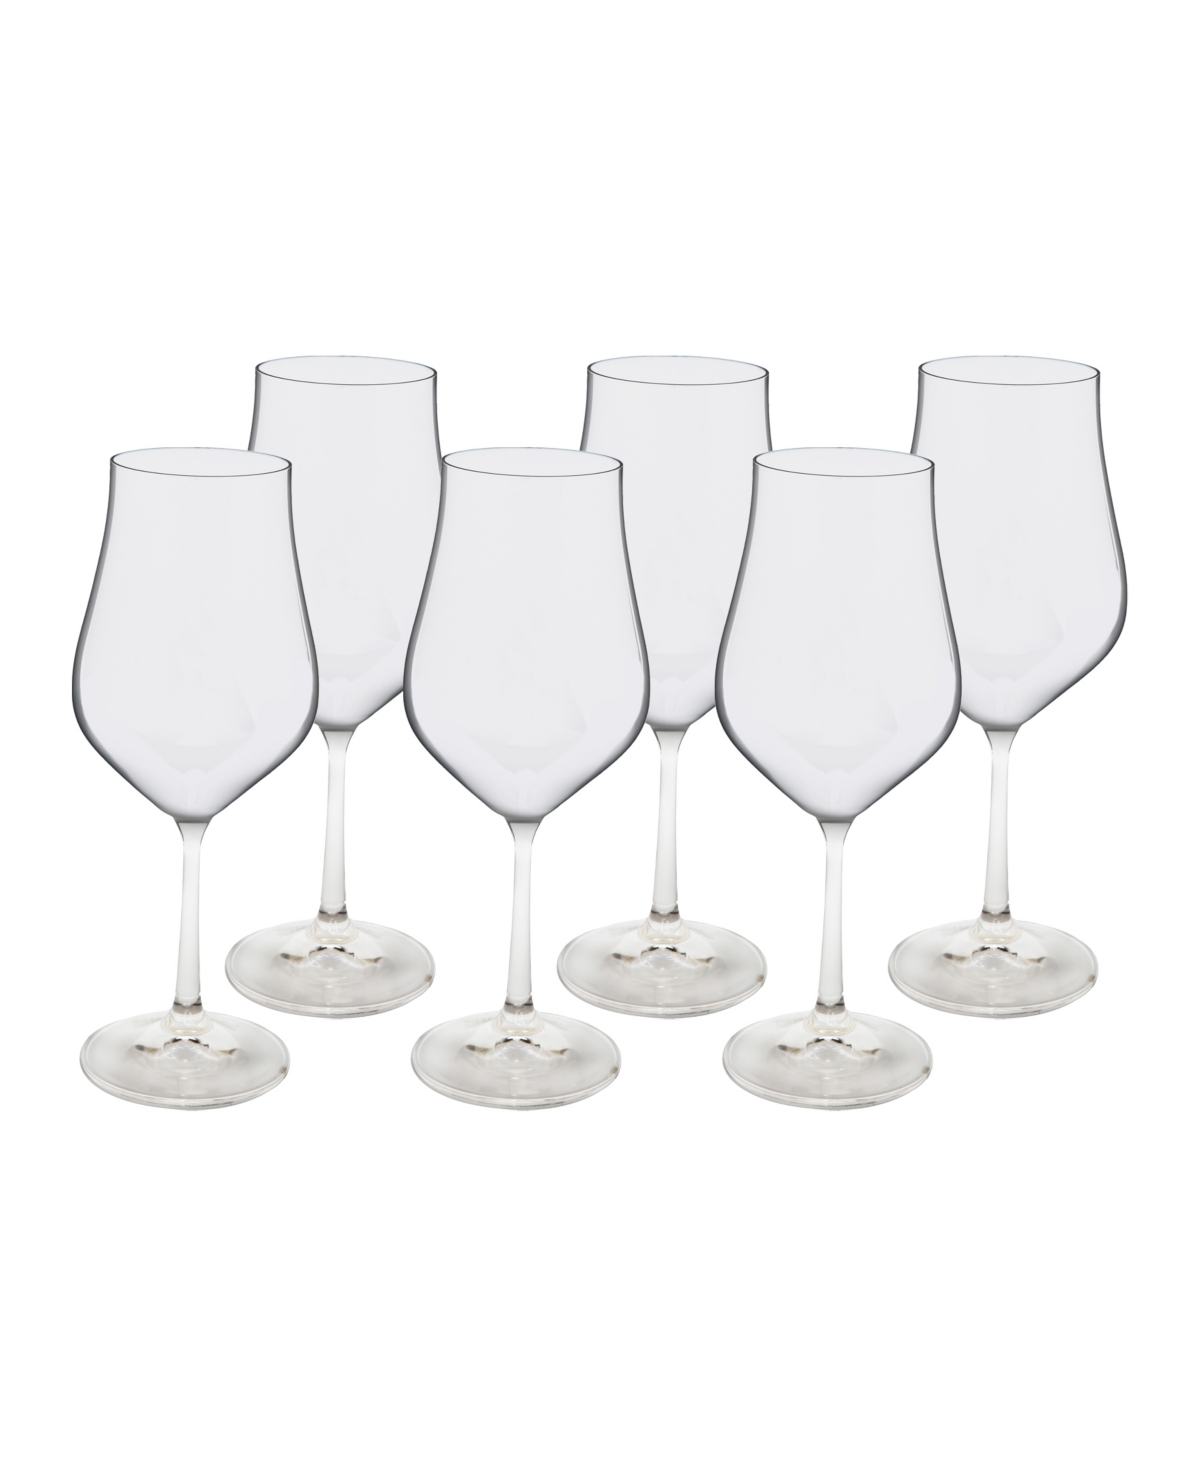 Classic Touch White Water Glasses With Stem, Set Of 6